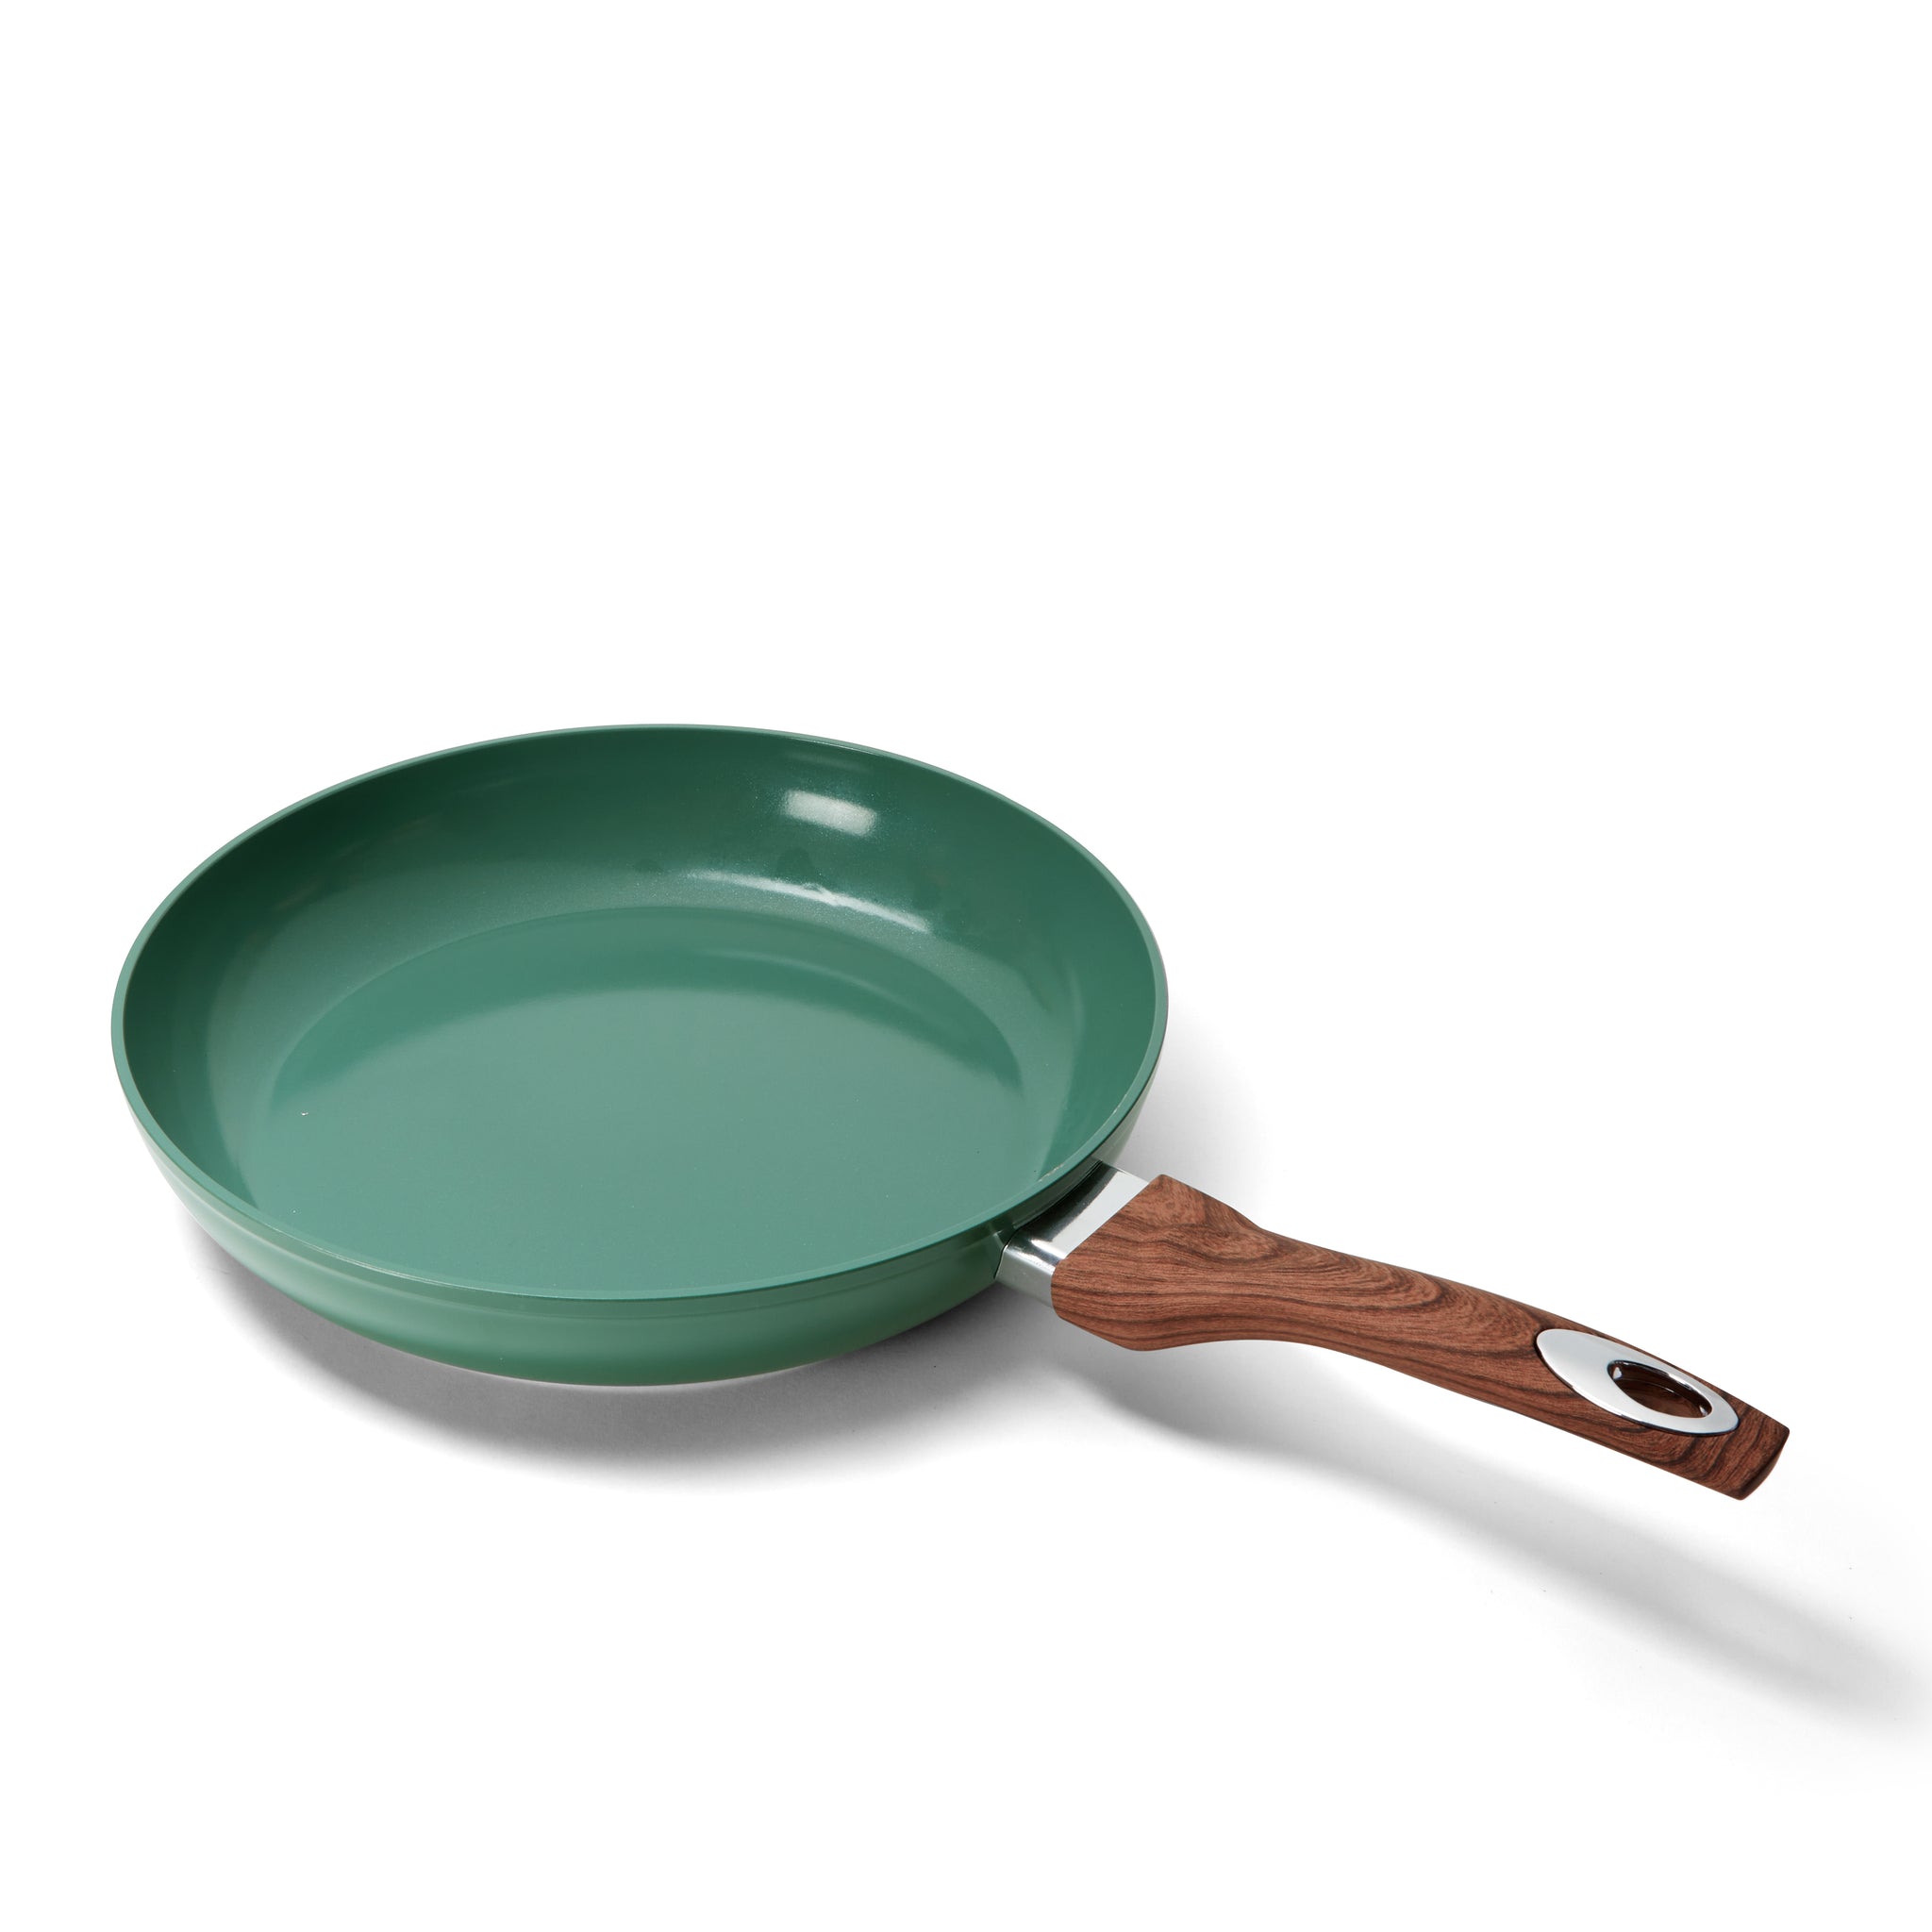 Phantom Chef 12-in Green Non-Stick Wok with Wood Handle